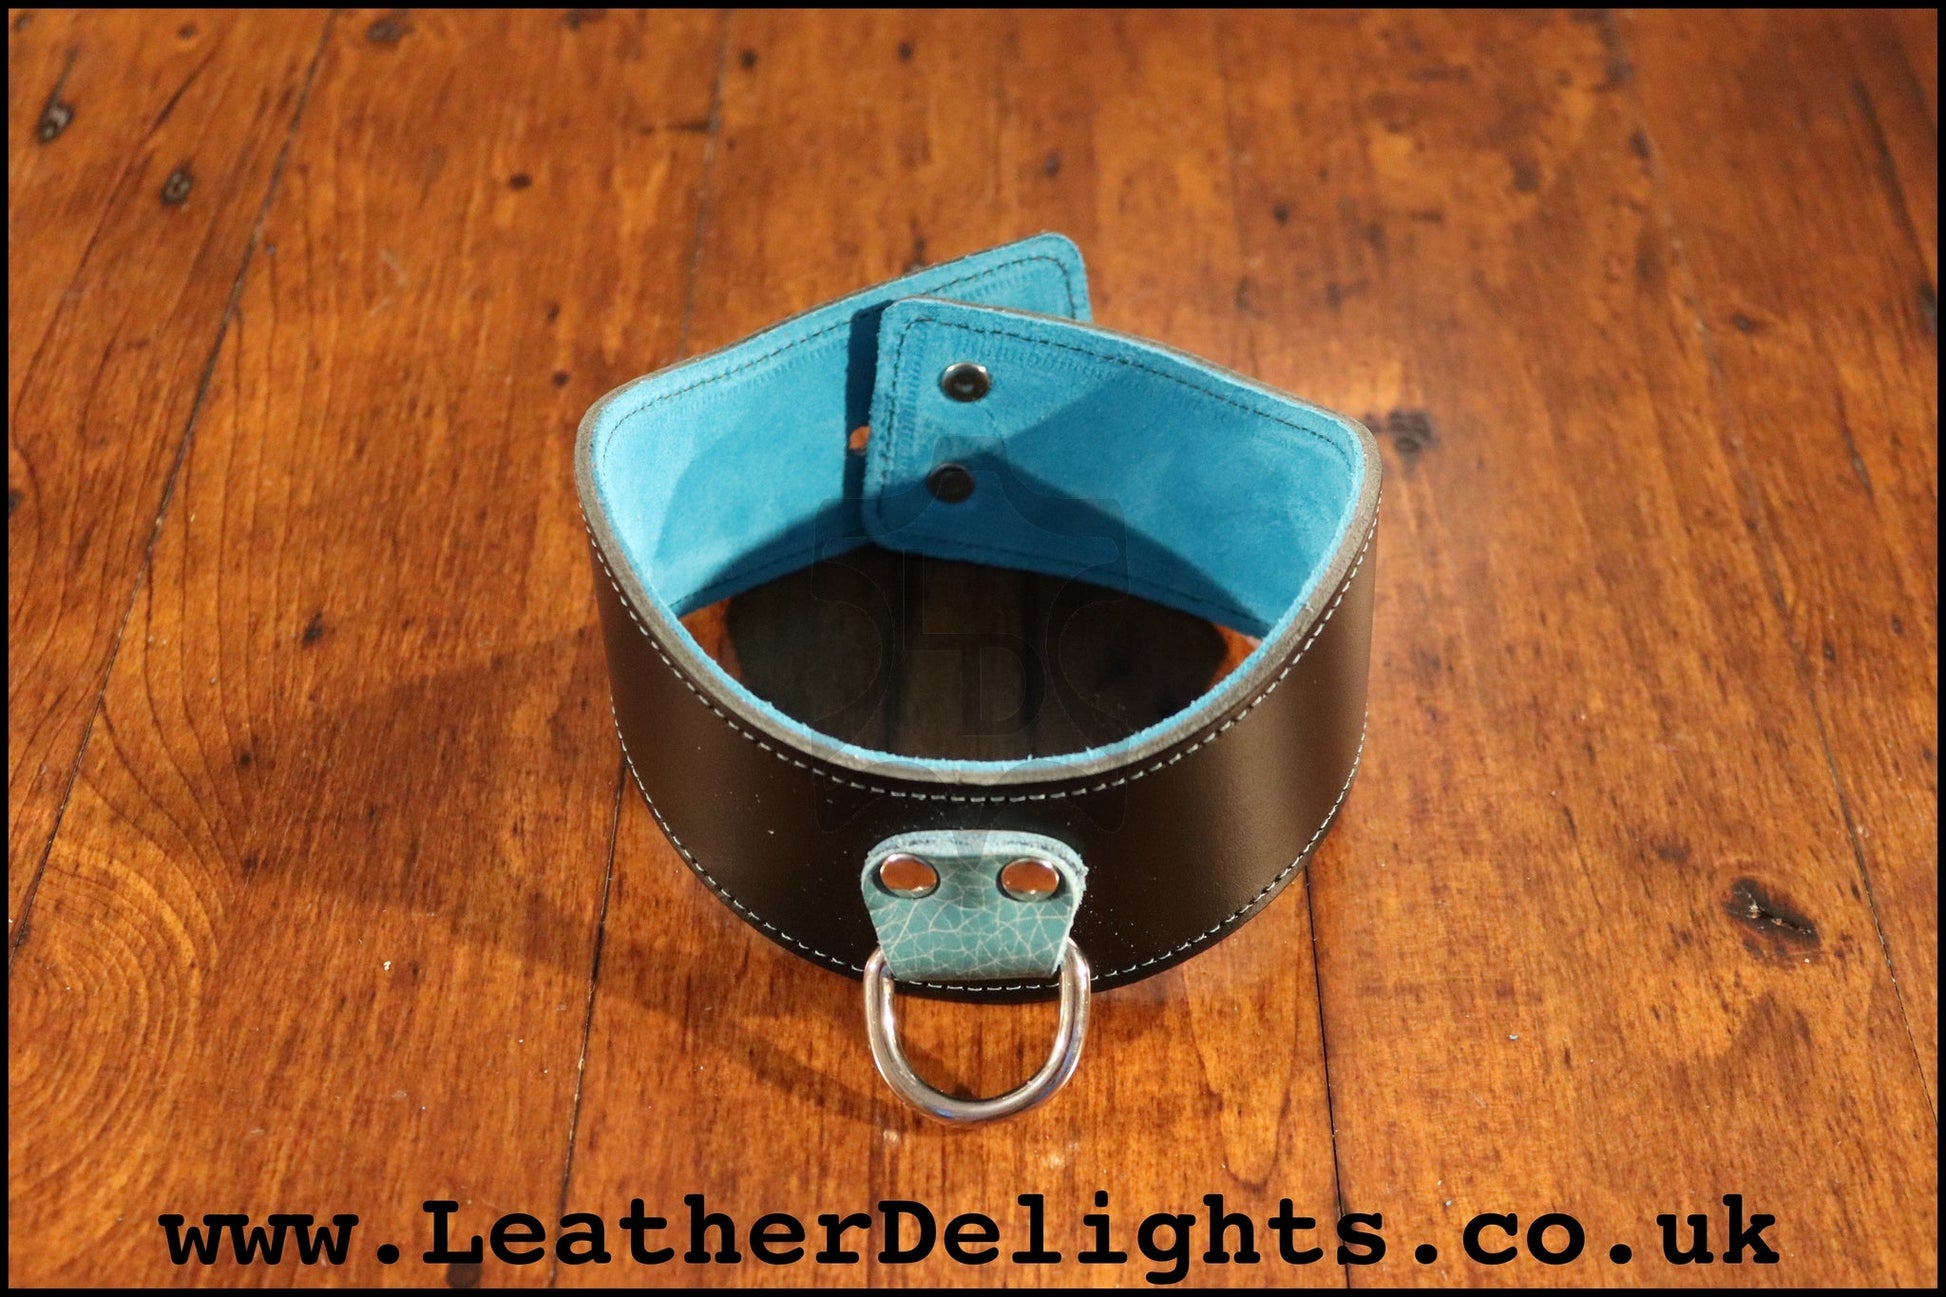 2" Wide Contour Collar with Welded D Ring - Leather Delights